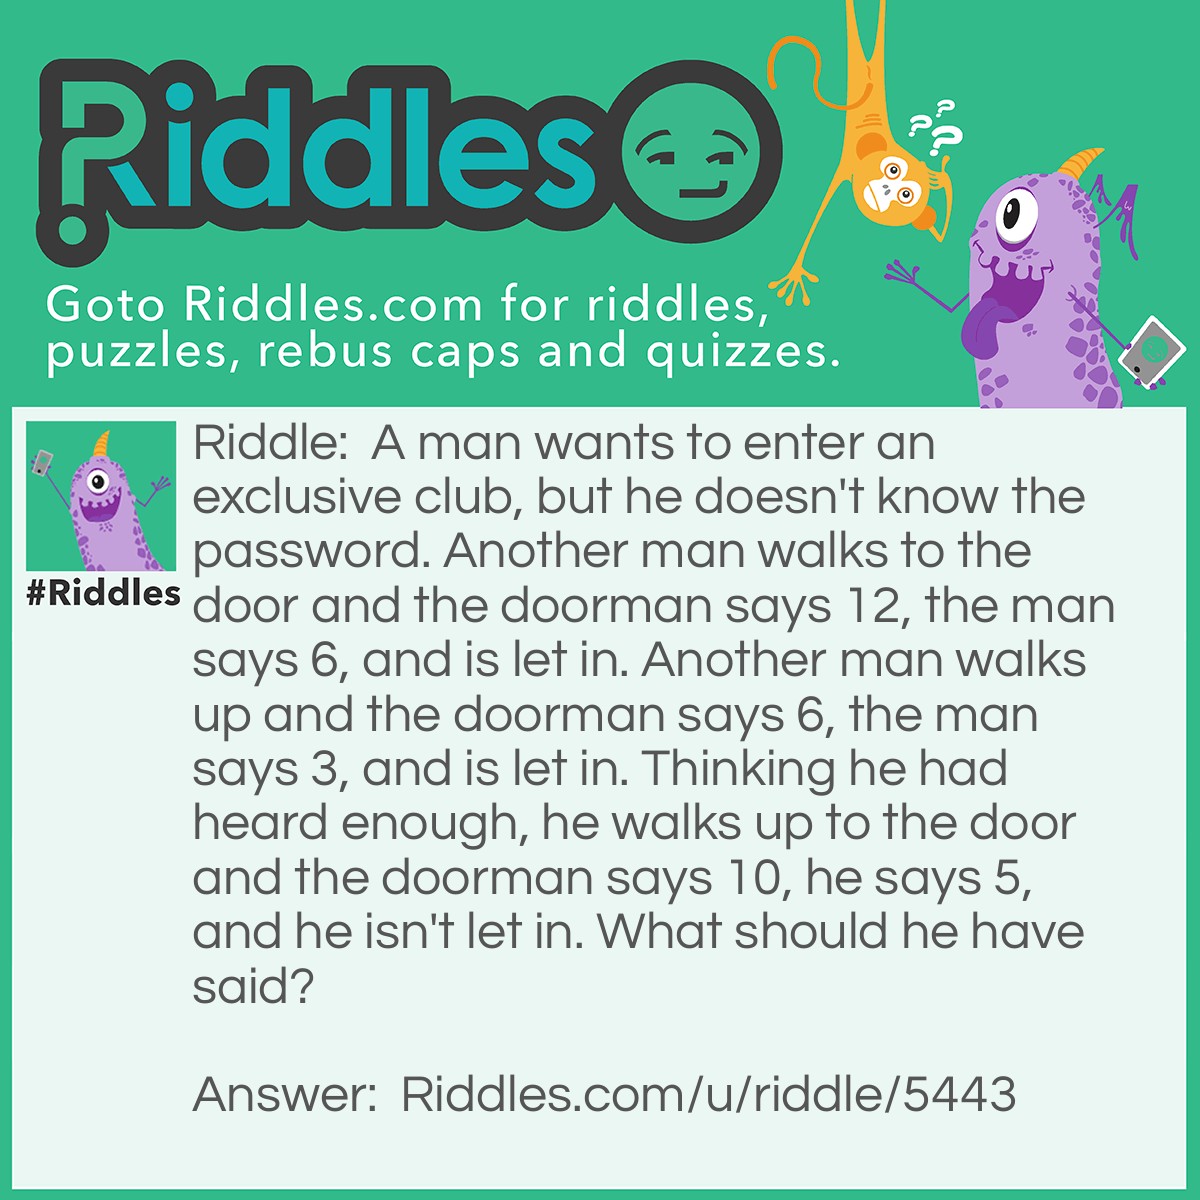 Riddle: A man wants to enter an exclusive club, but he doesn't know the password. Another man walks to the door and the doorman says 12, the man says 6, and is let in. Another man walks up and the doorman says 6, the man says 3, and is let in. Thinking he had heard enough, he walks up to the door and the doorman says 10, he says 5, and he isn't let in. What should he have said? Answer: He should have said three, because the password was to say the number of how many letters were in the number the doorman said.